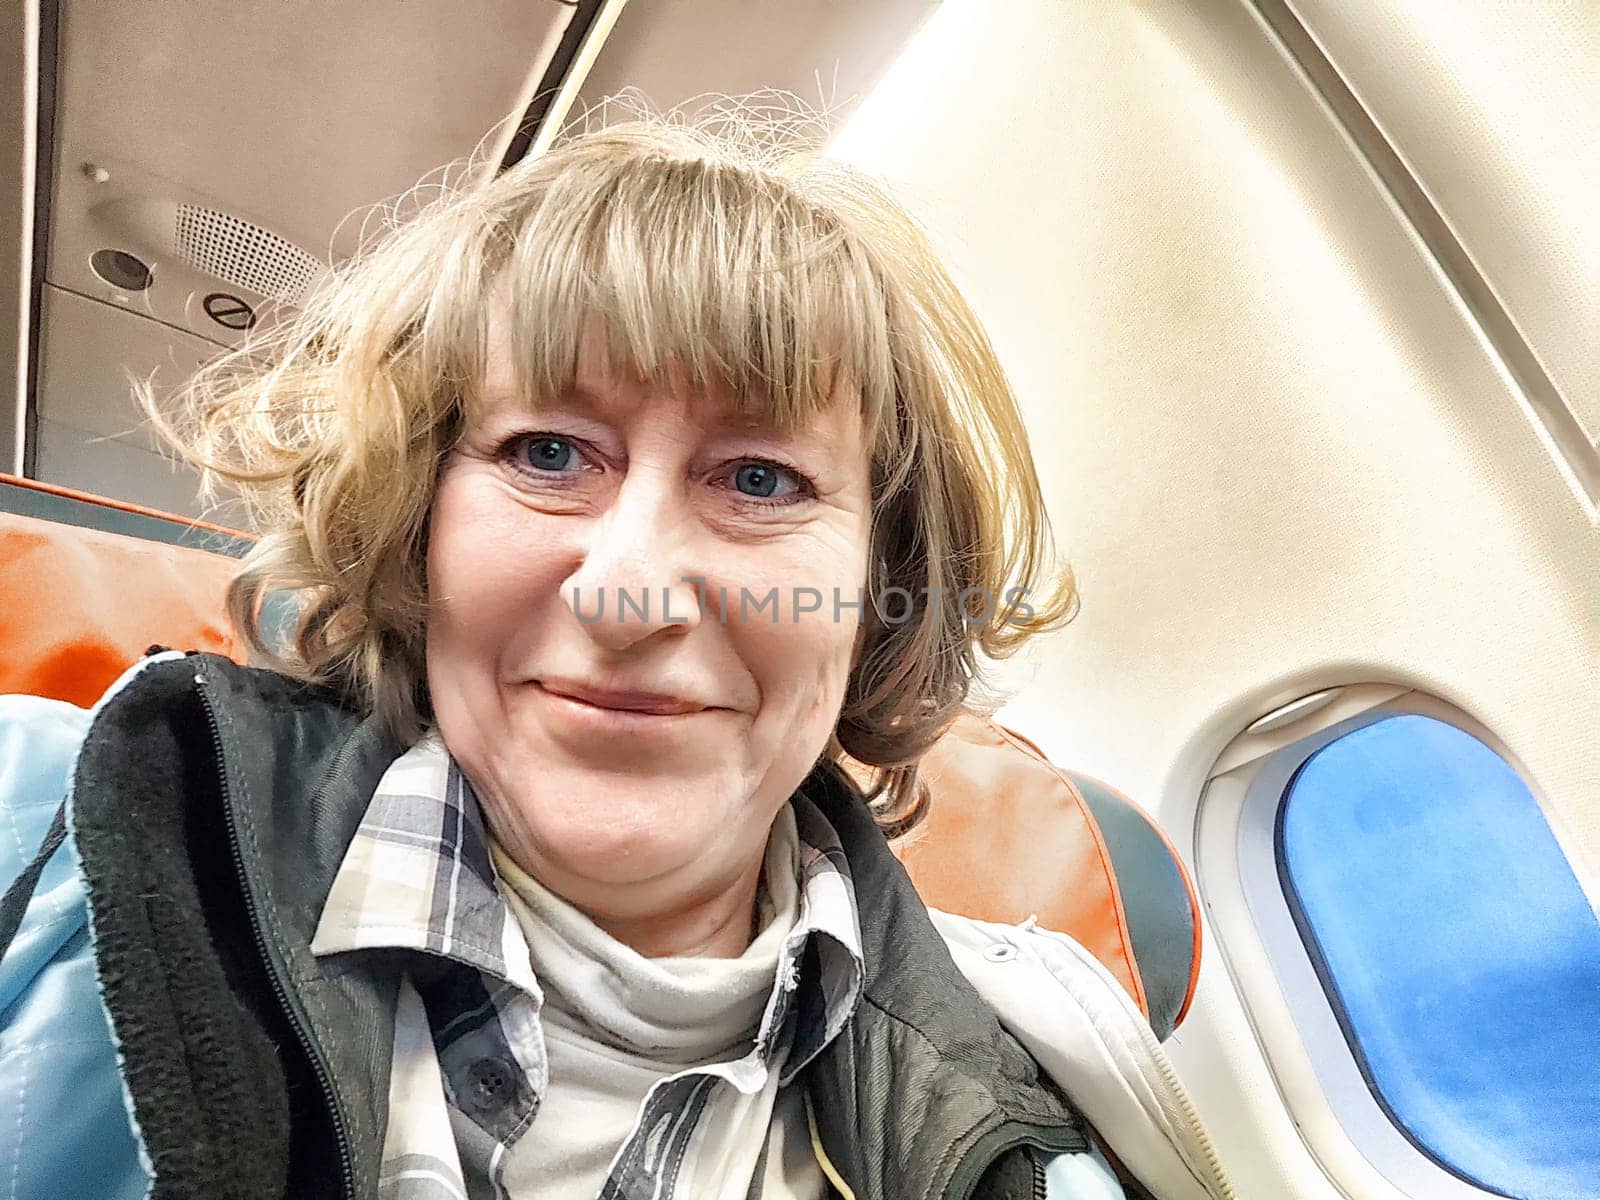 A middle-aged woman takes a selfie on a plane. Portrait of a girl. Smiling Woman on Airplane